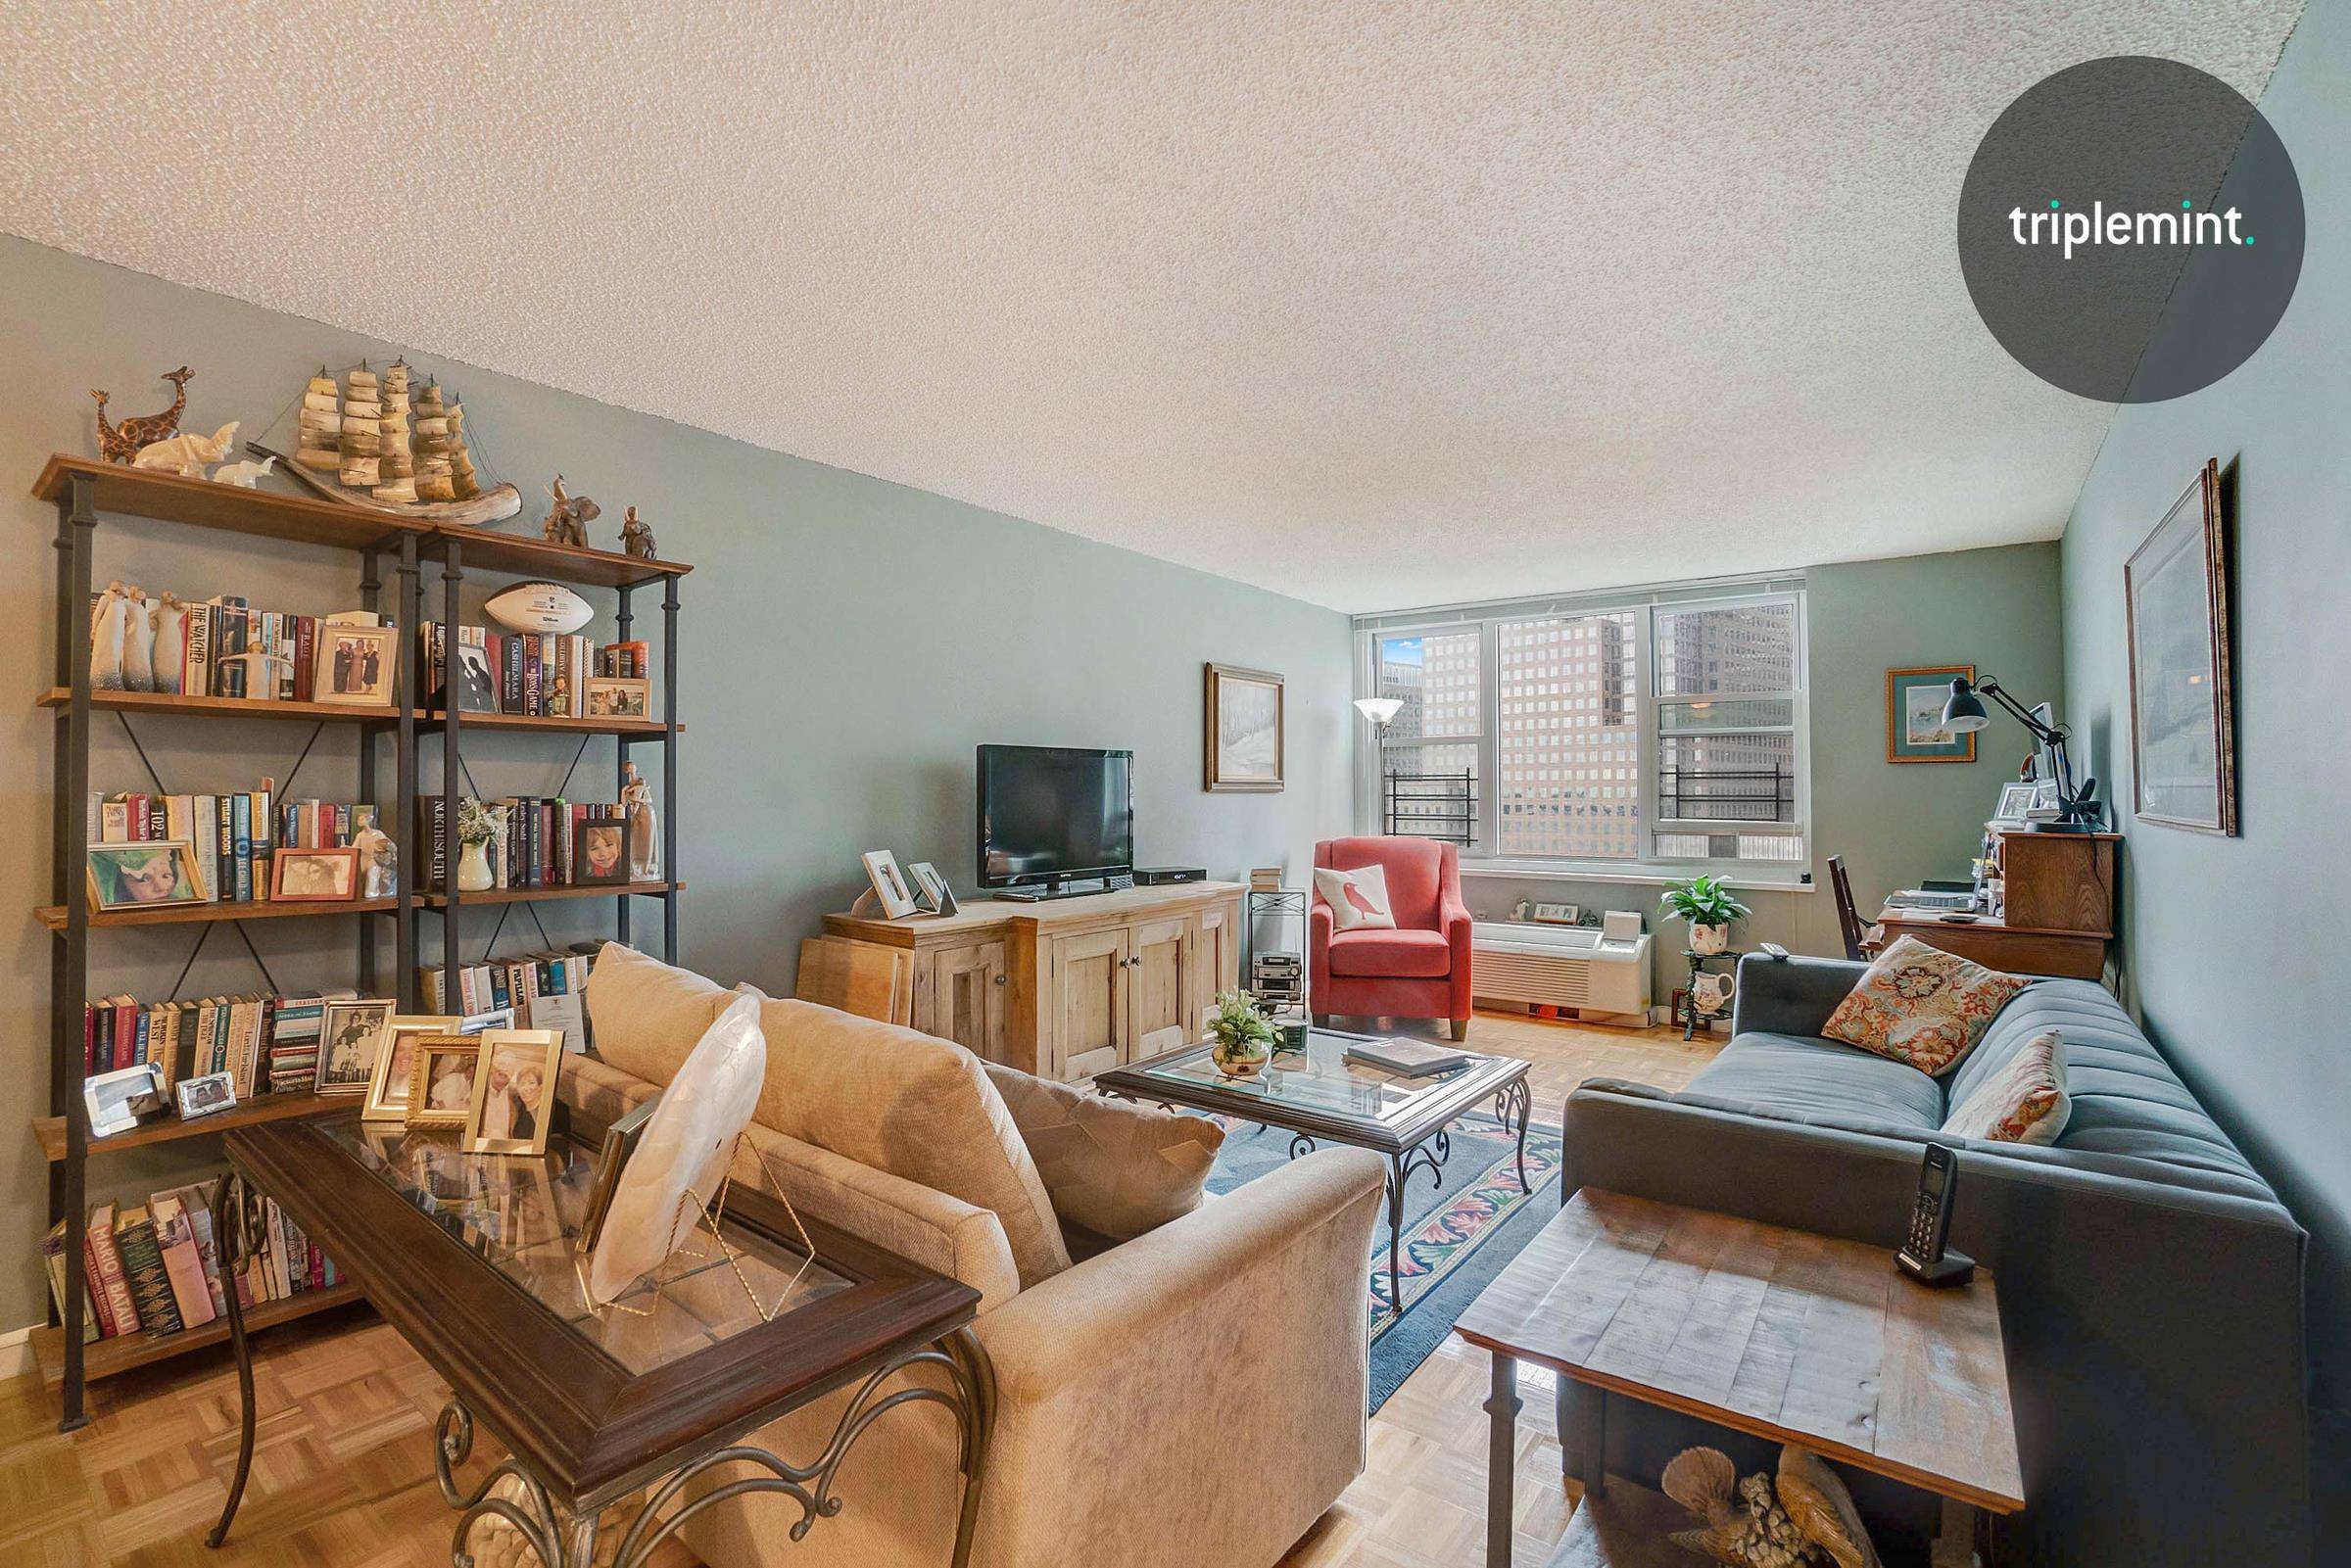 This expansive one bedroom apartment has it all.